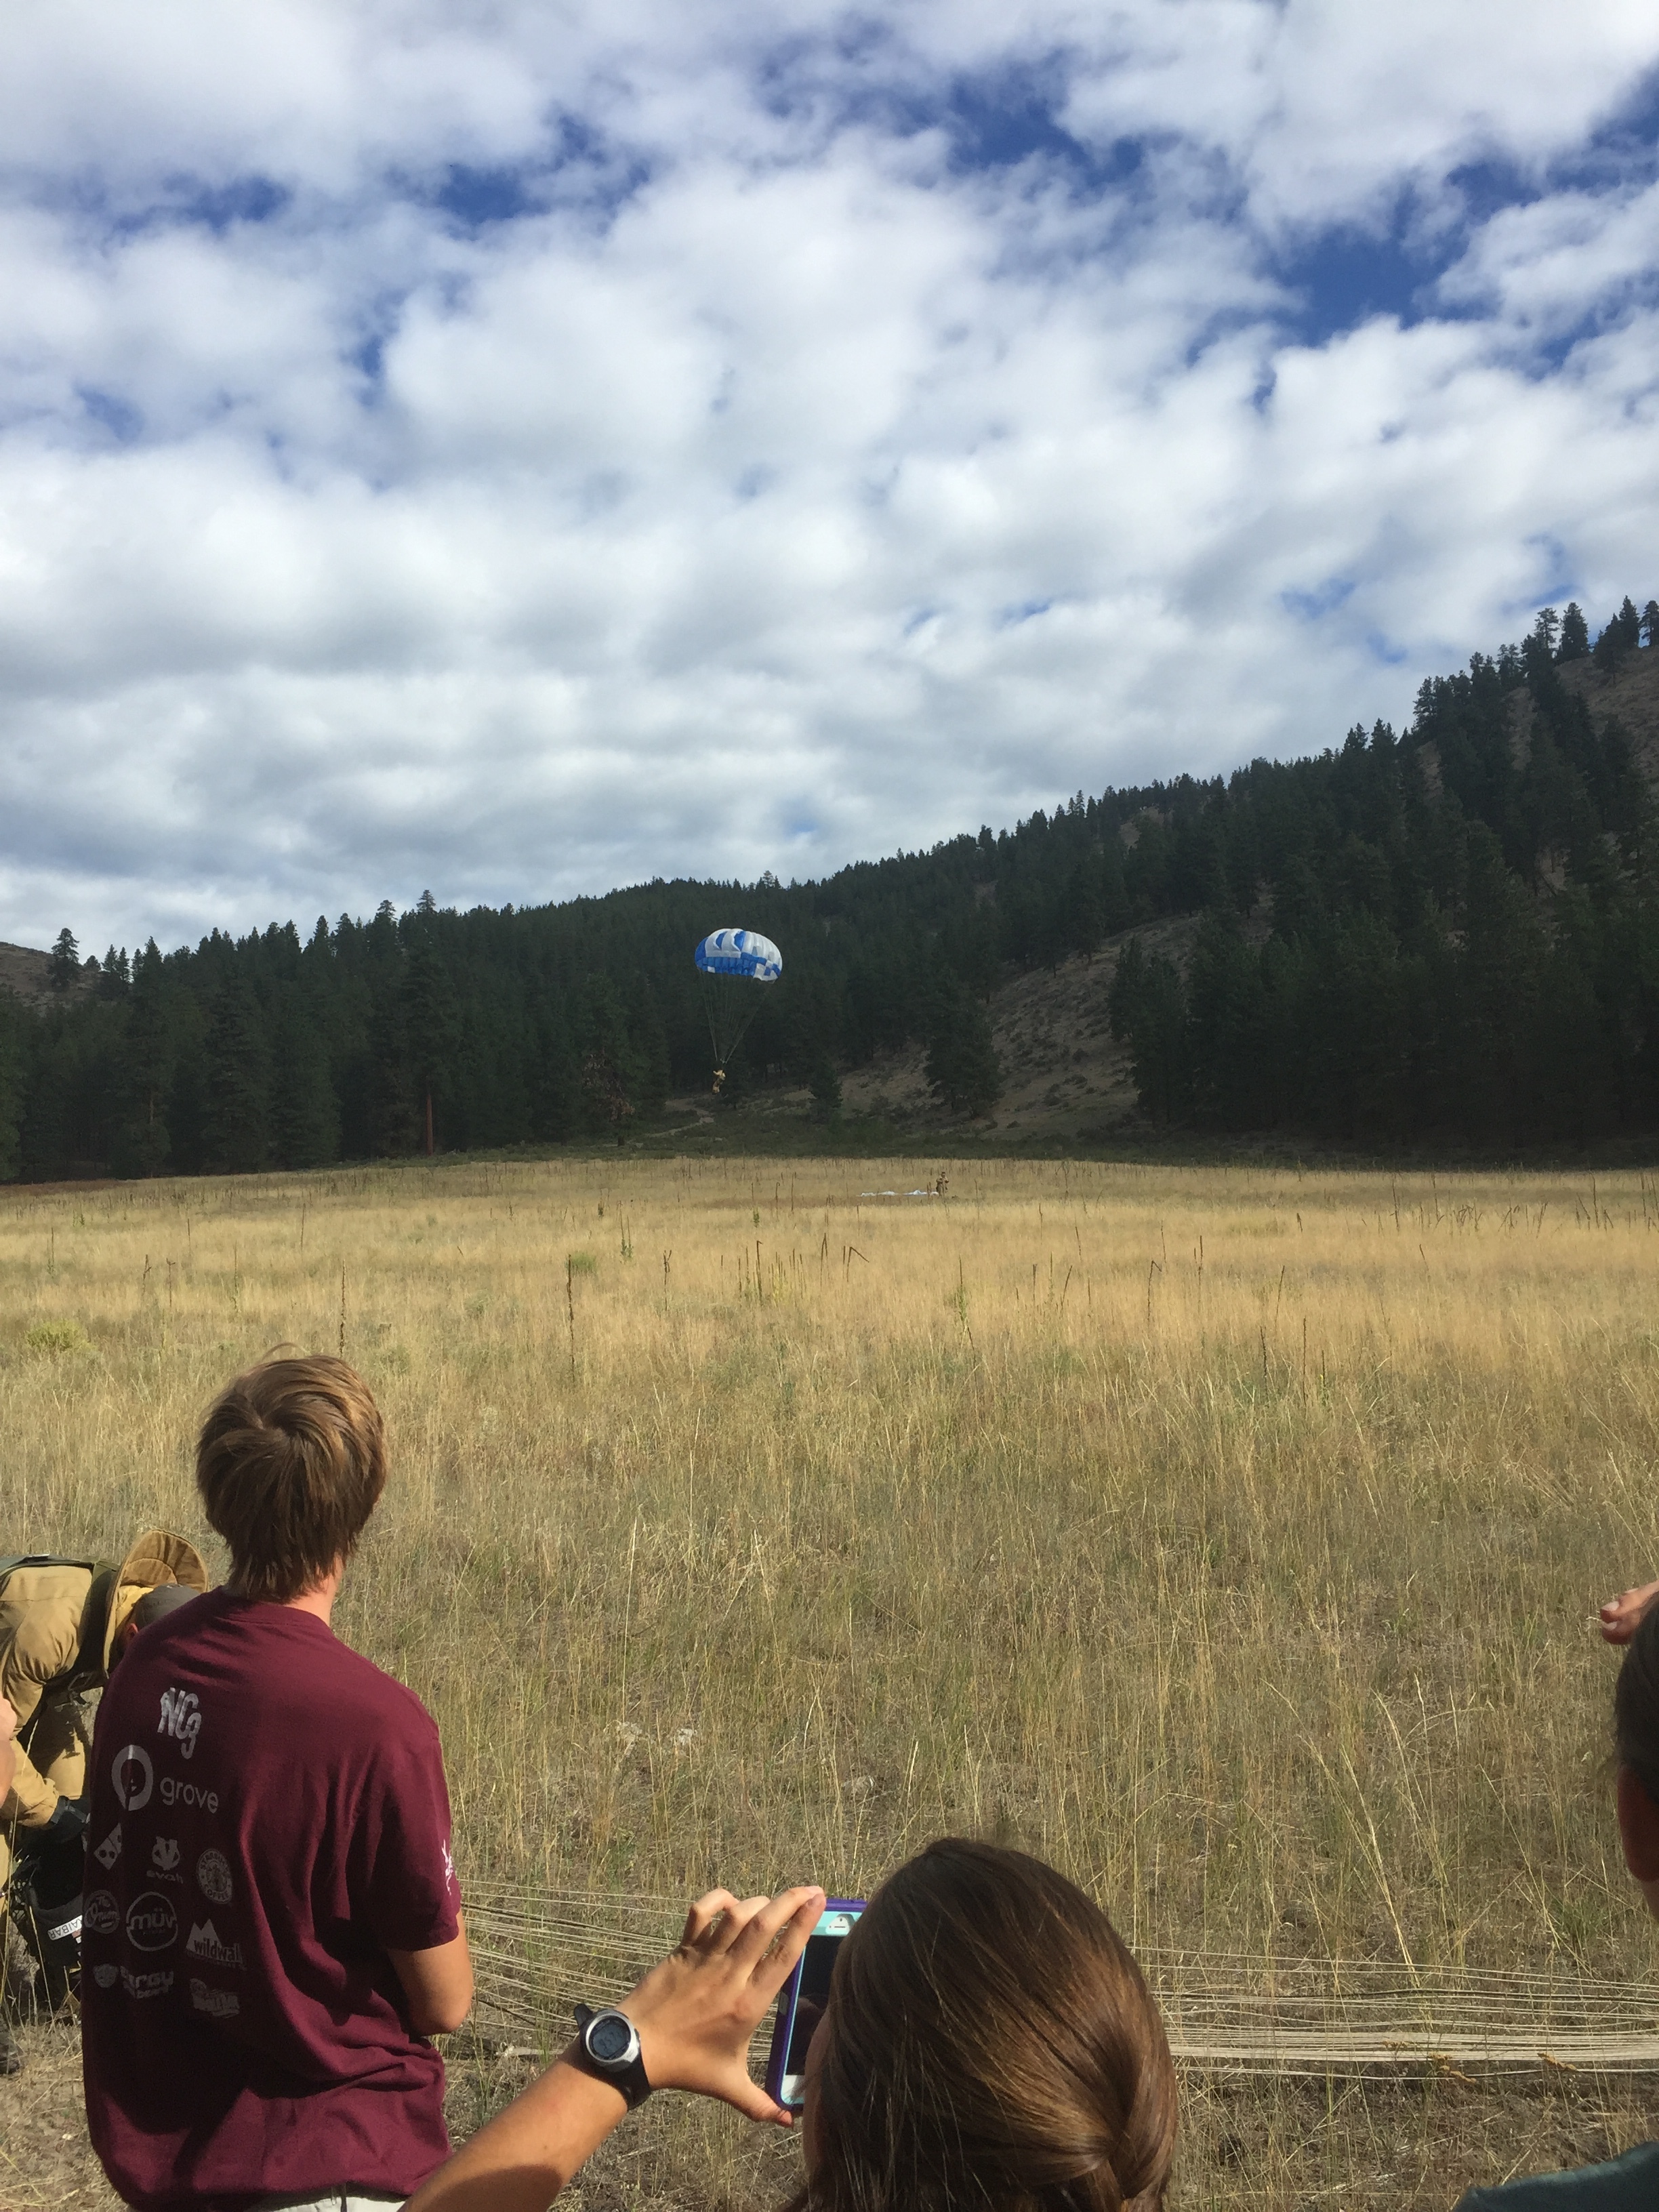 Smokejumpers drop in on our last morning in the Methow